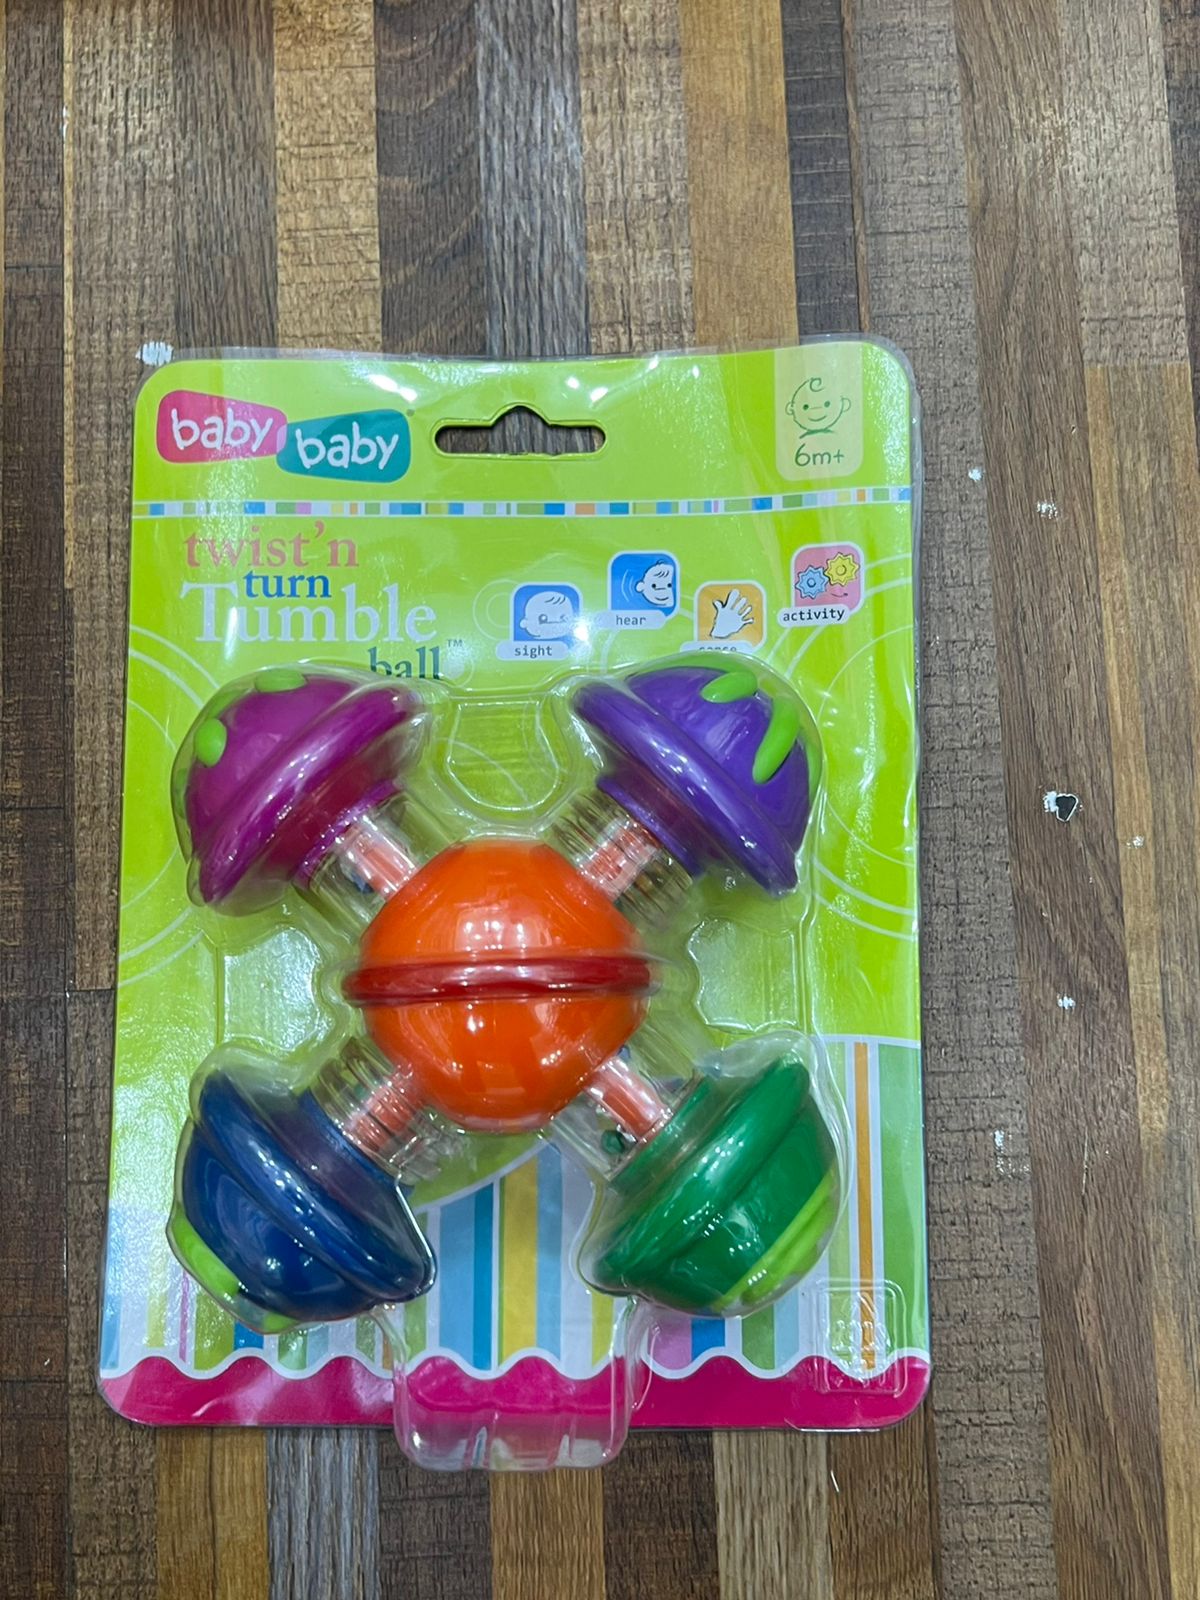 Baby rattle All About Baby Infant Twist 'N' Turn Tumble Ball